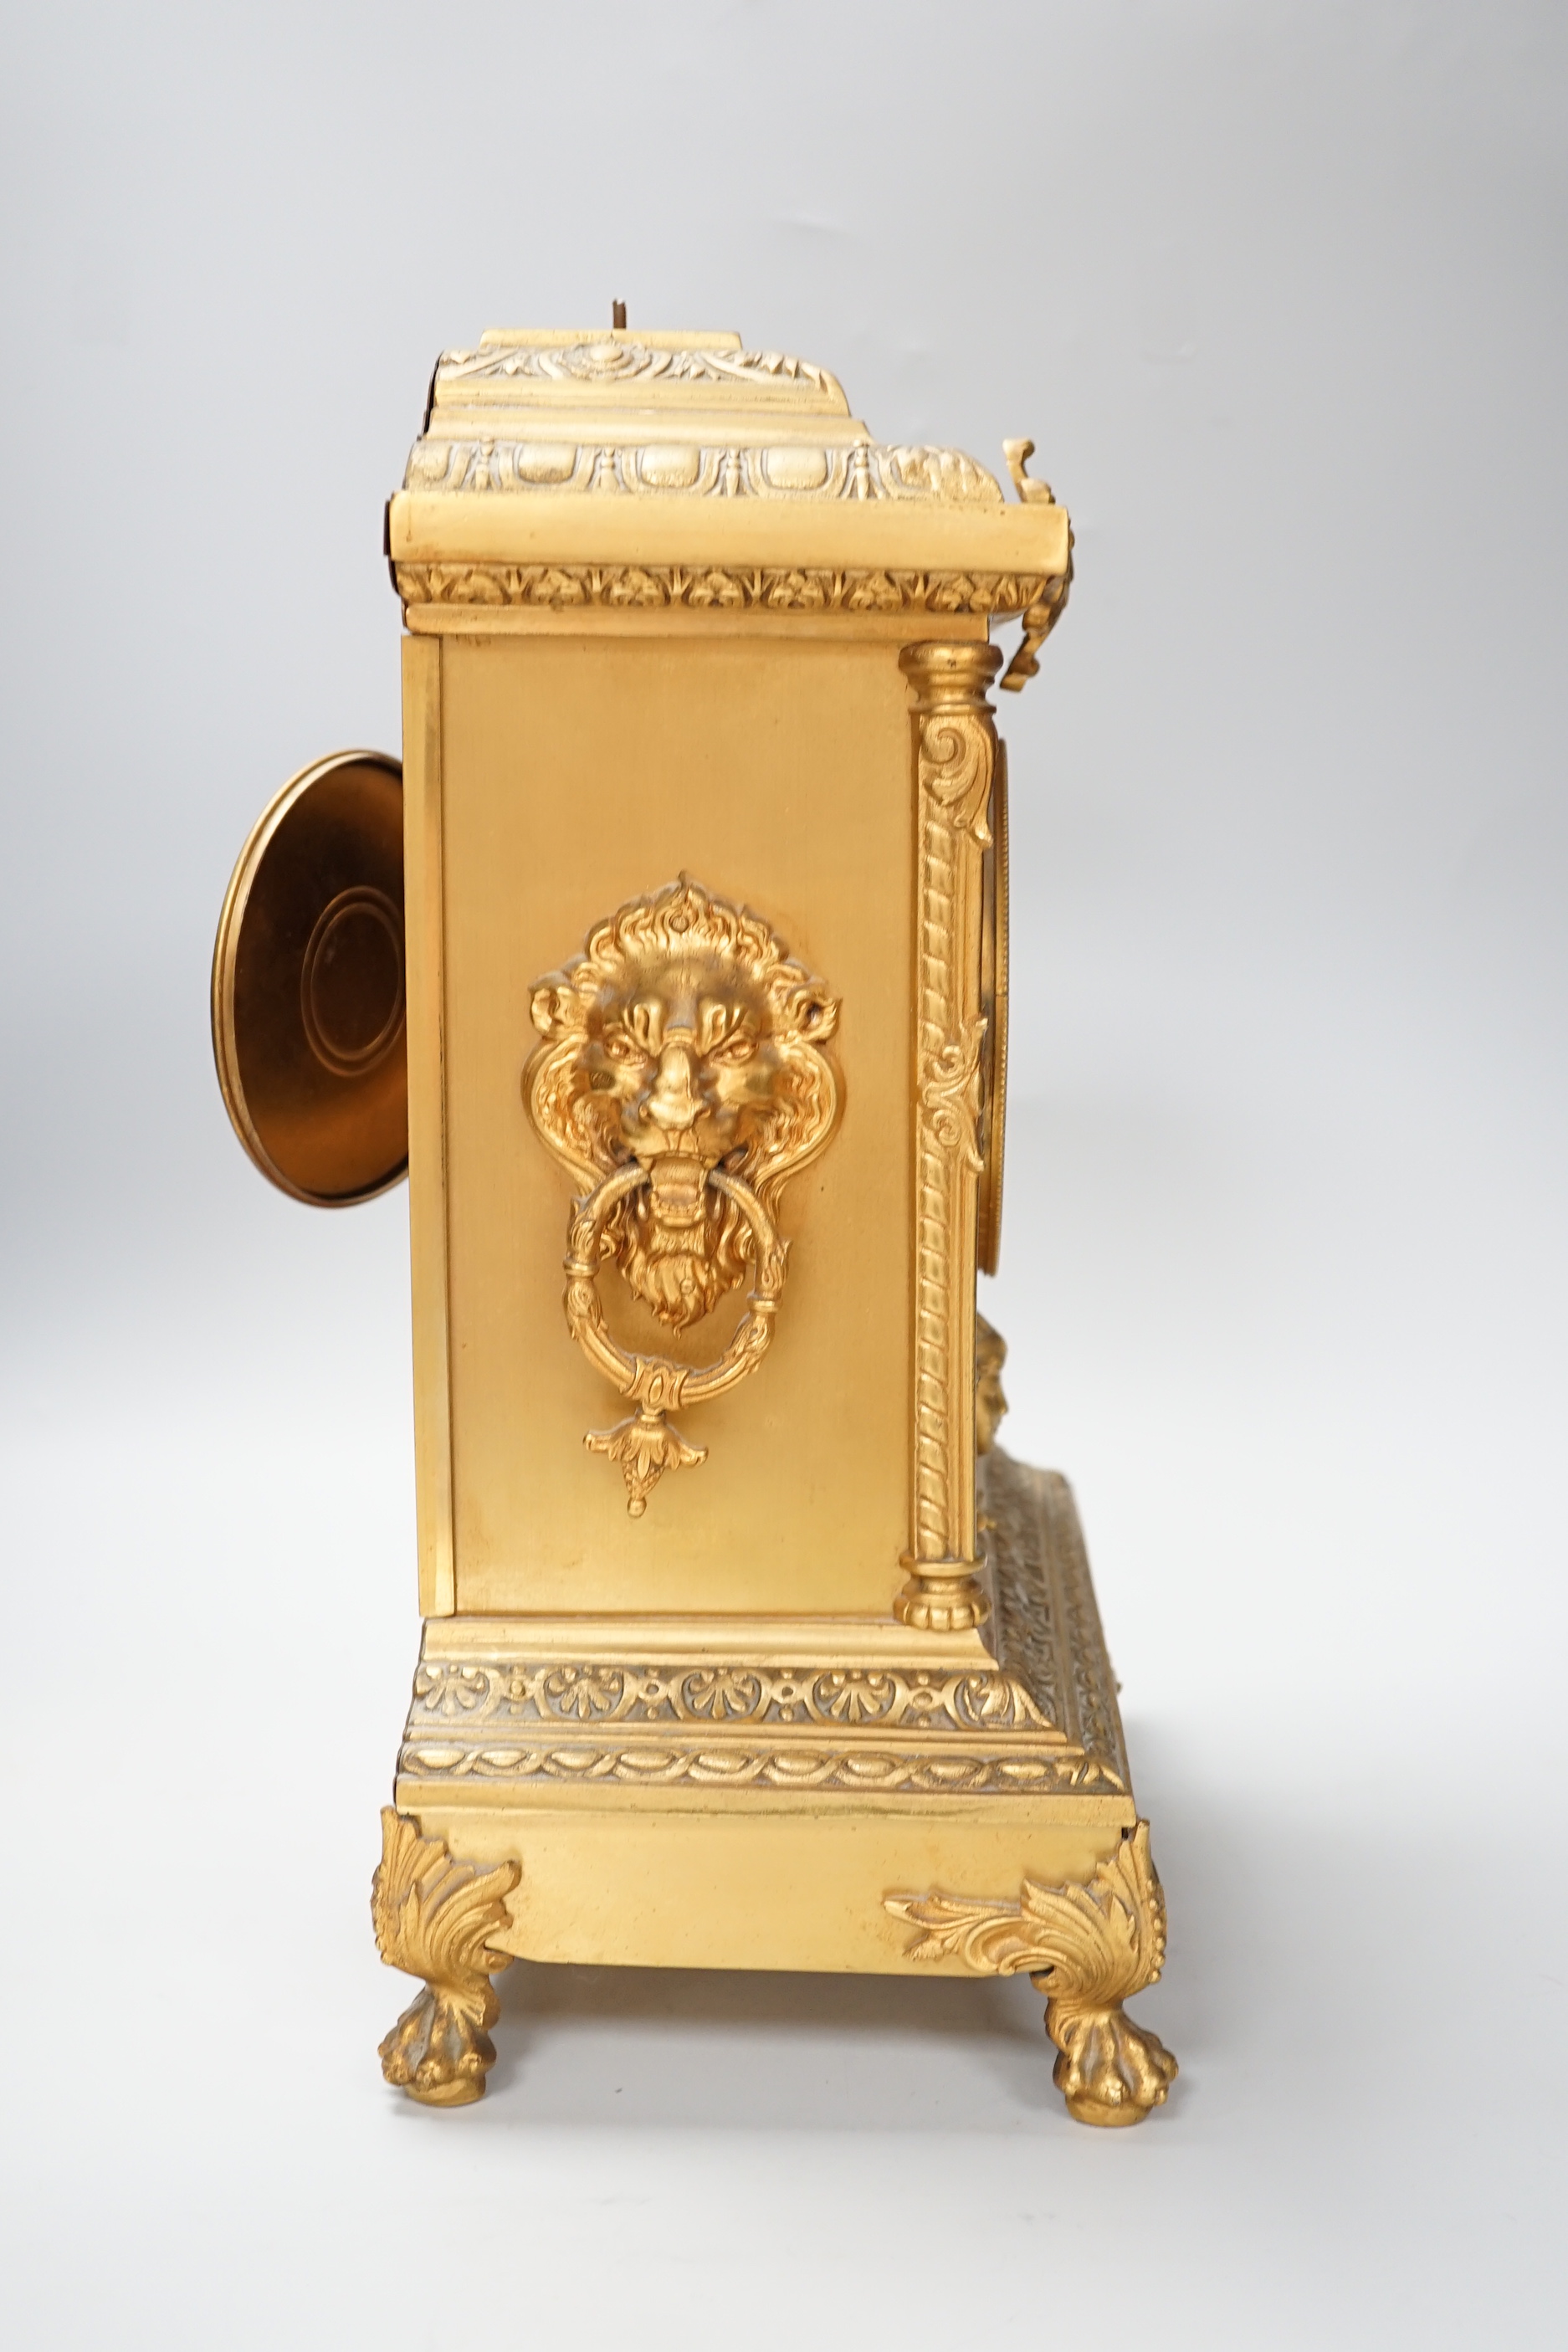 A French brass mantel clock, c.1900- no pendulum, loose finial, 37cm excl finial